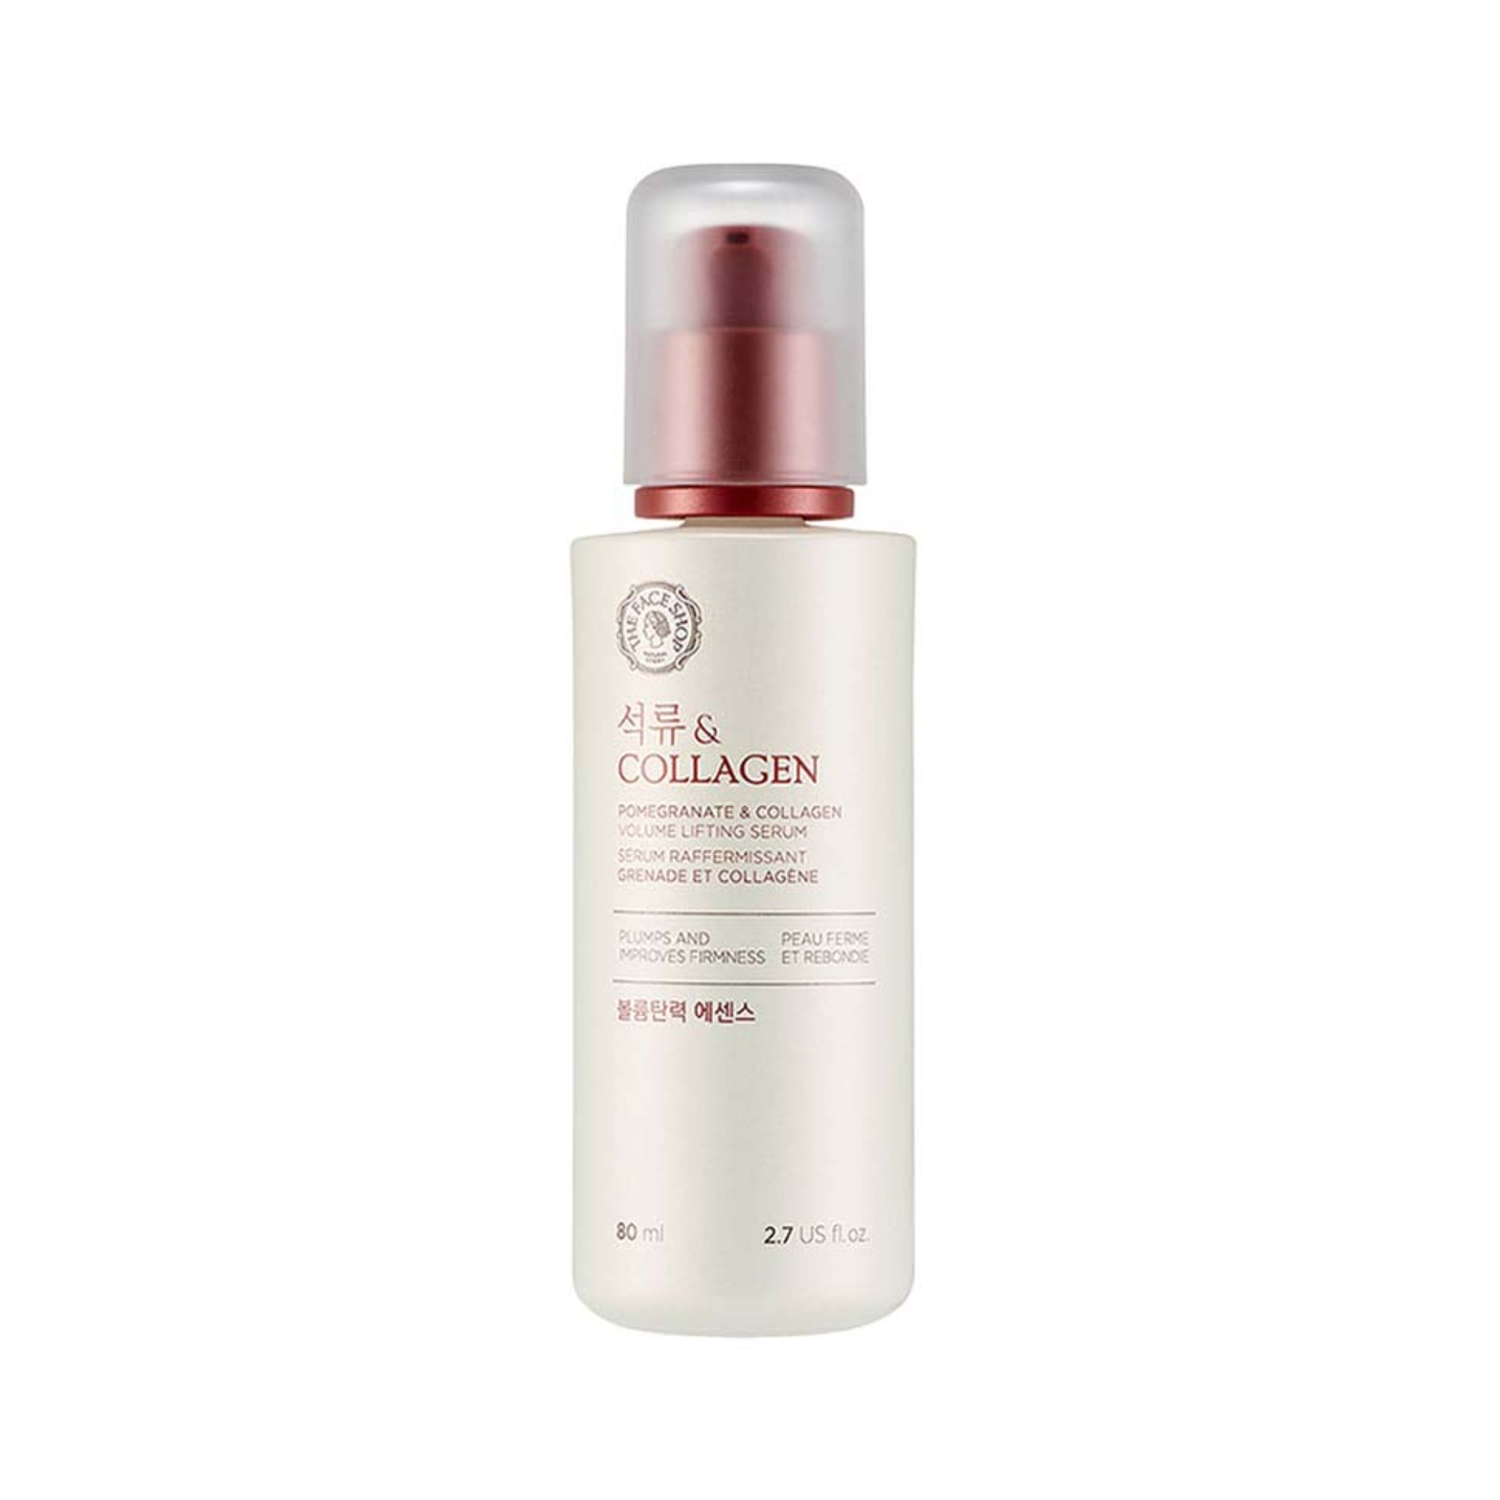 The Face Shop | The Face Shop Pomegranate & Collagen Volume Lifting Serum (80ml)